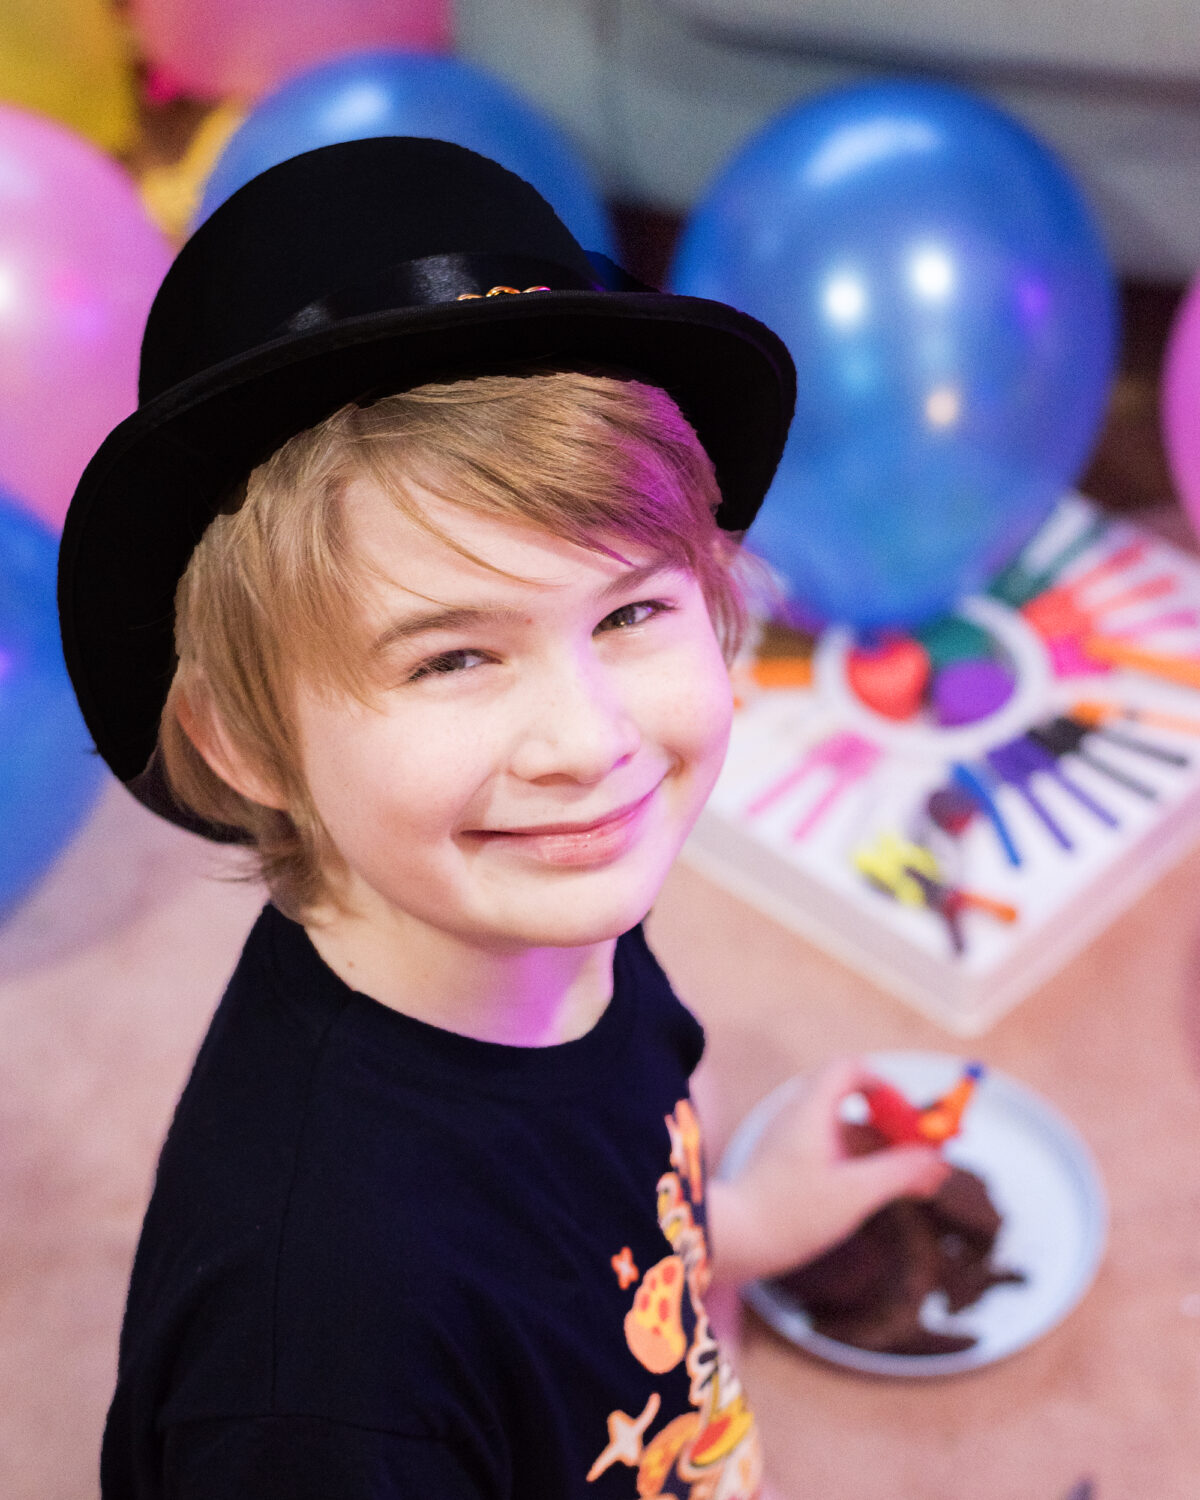 Image shows a happy boy smiling at the camera with a black top hat on. image by keep up with the jones family.